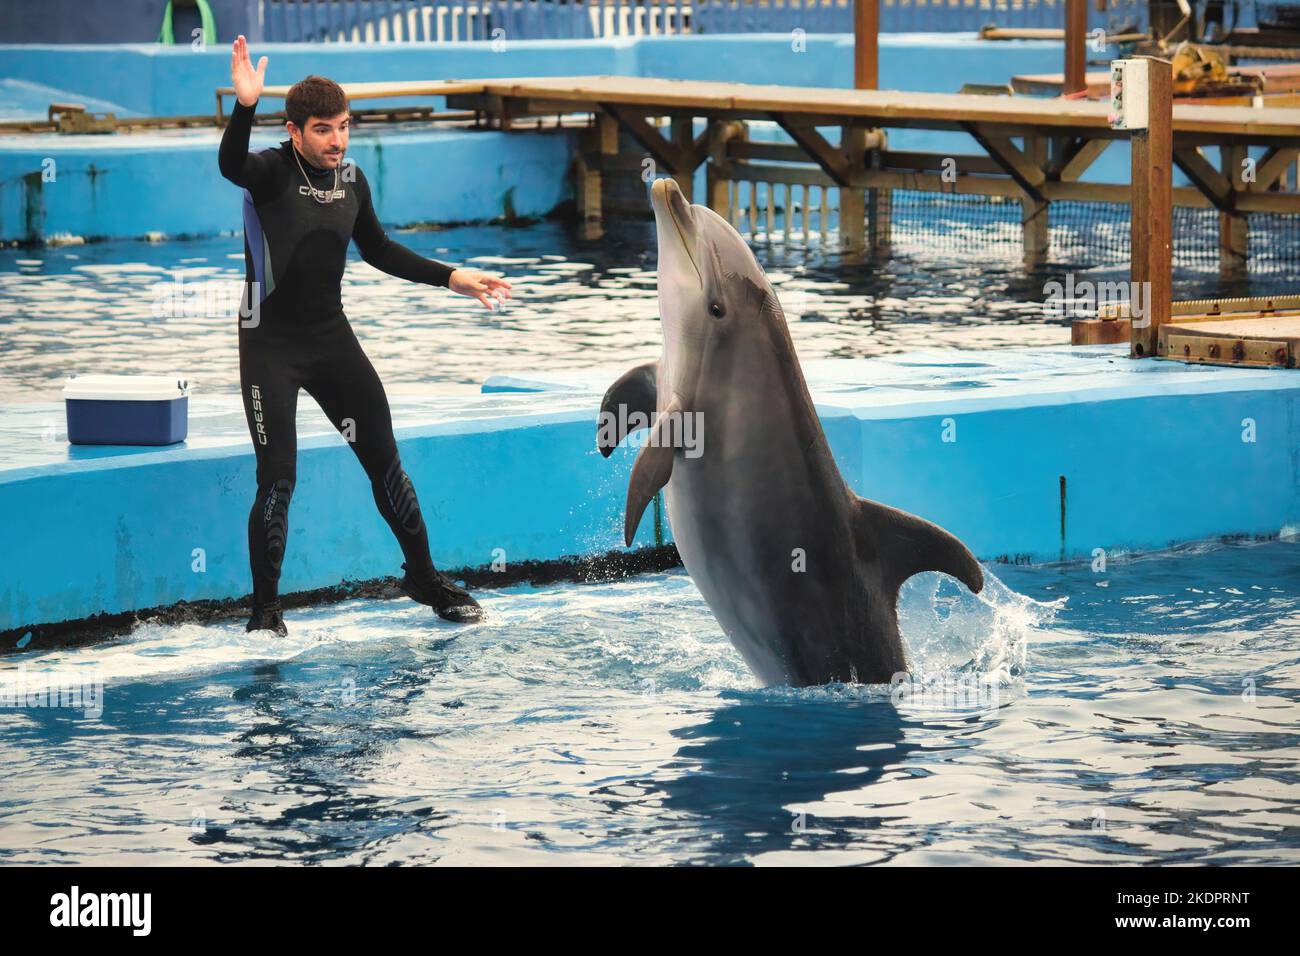 Valencia, Spain - Sept 13 2022: A trainer with dolphin jumping out of the water at the Oceanografic oceanarium aquarium Stock Photo